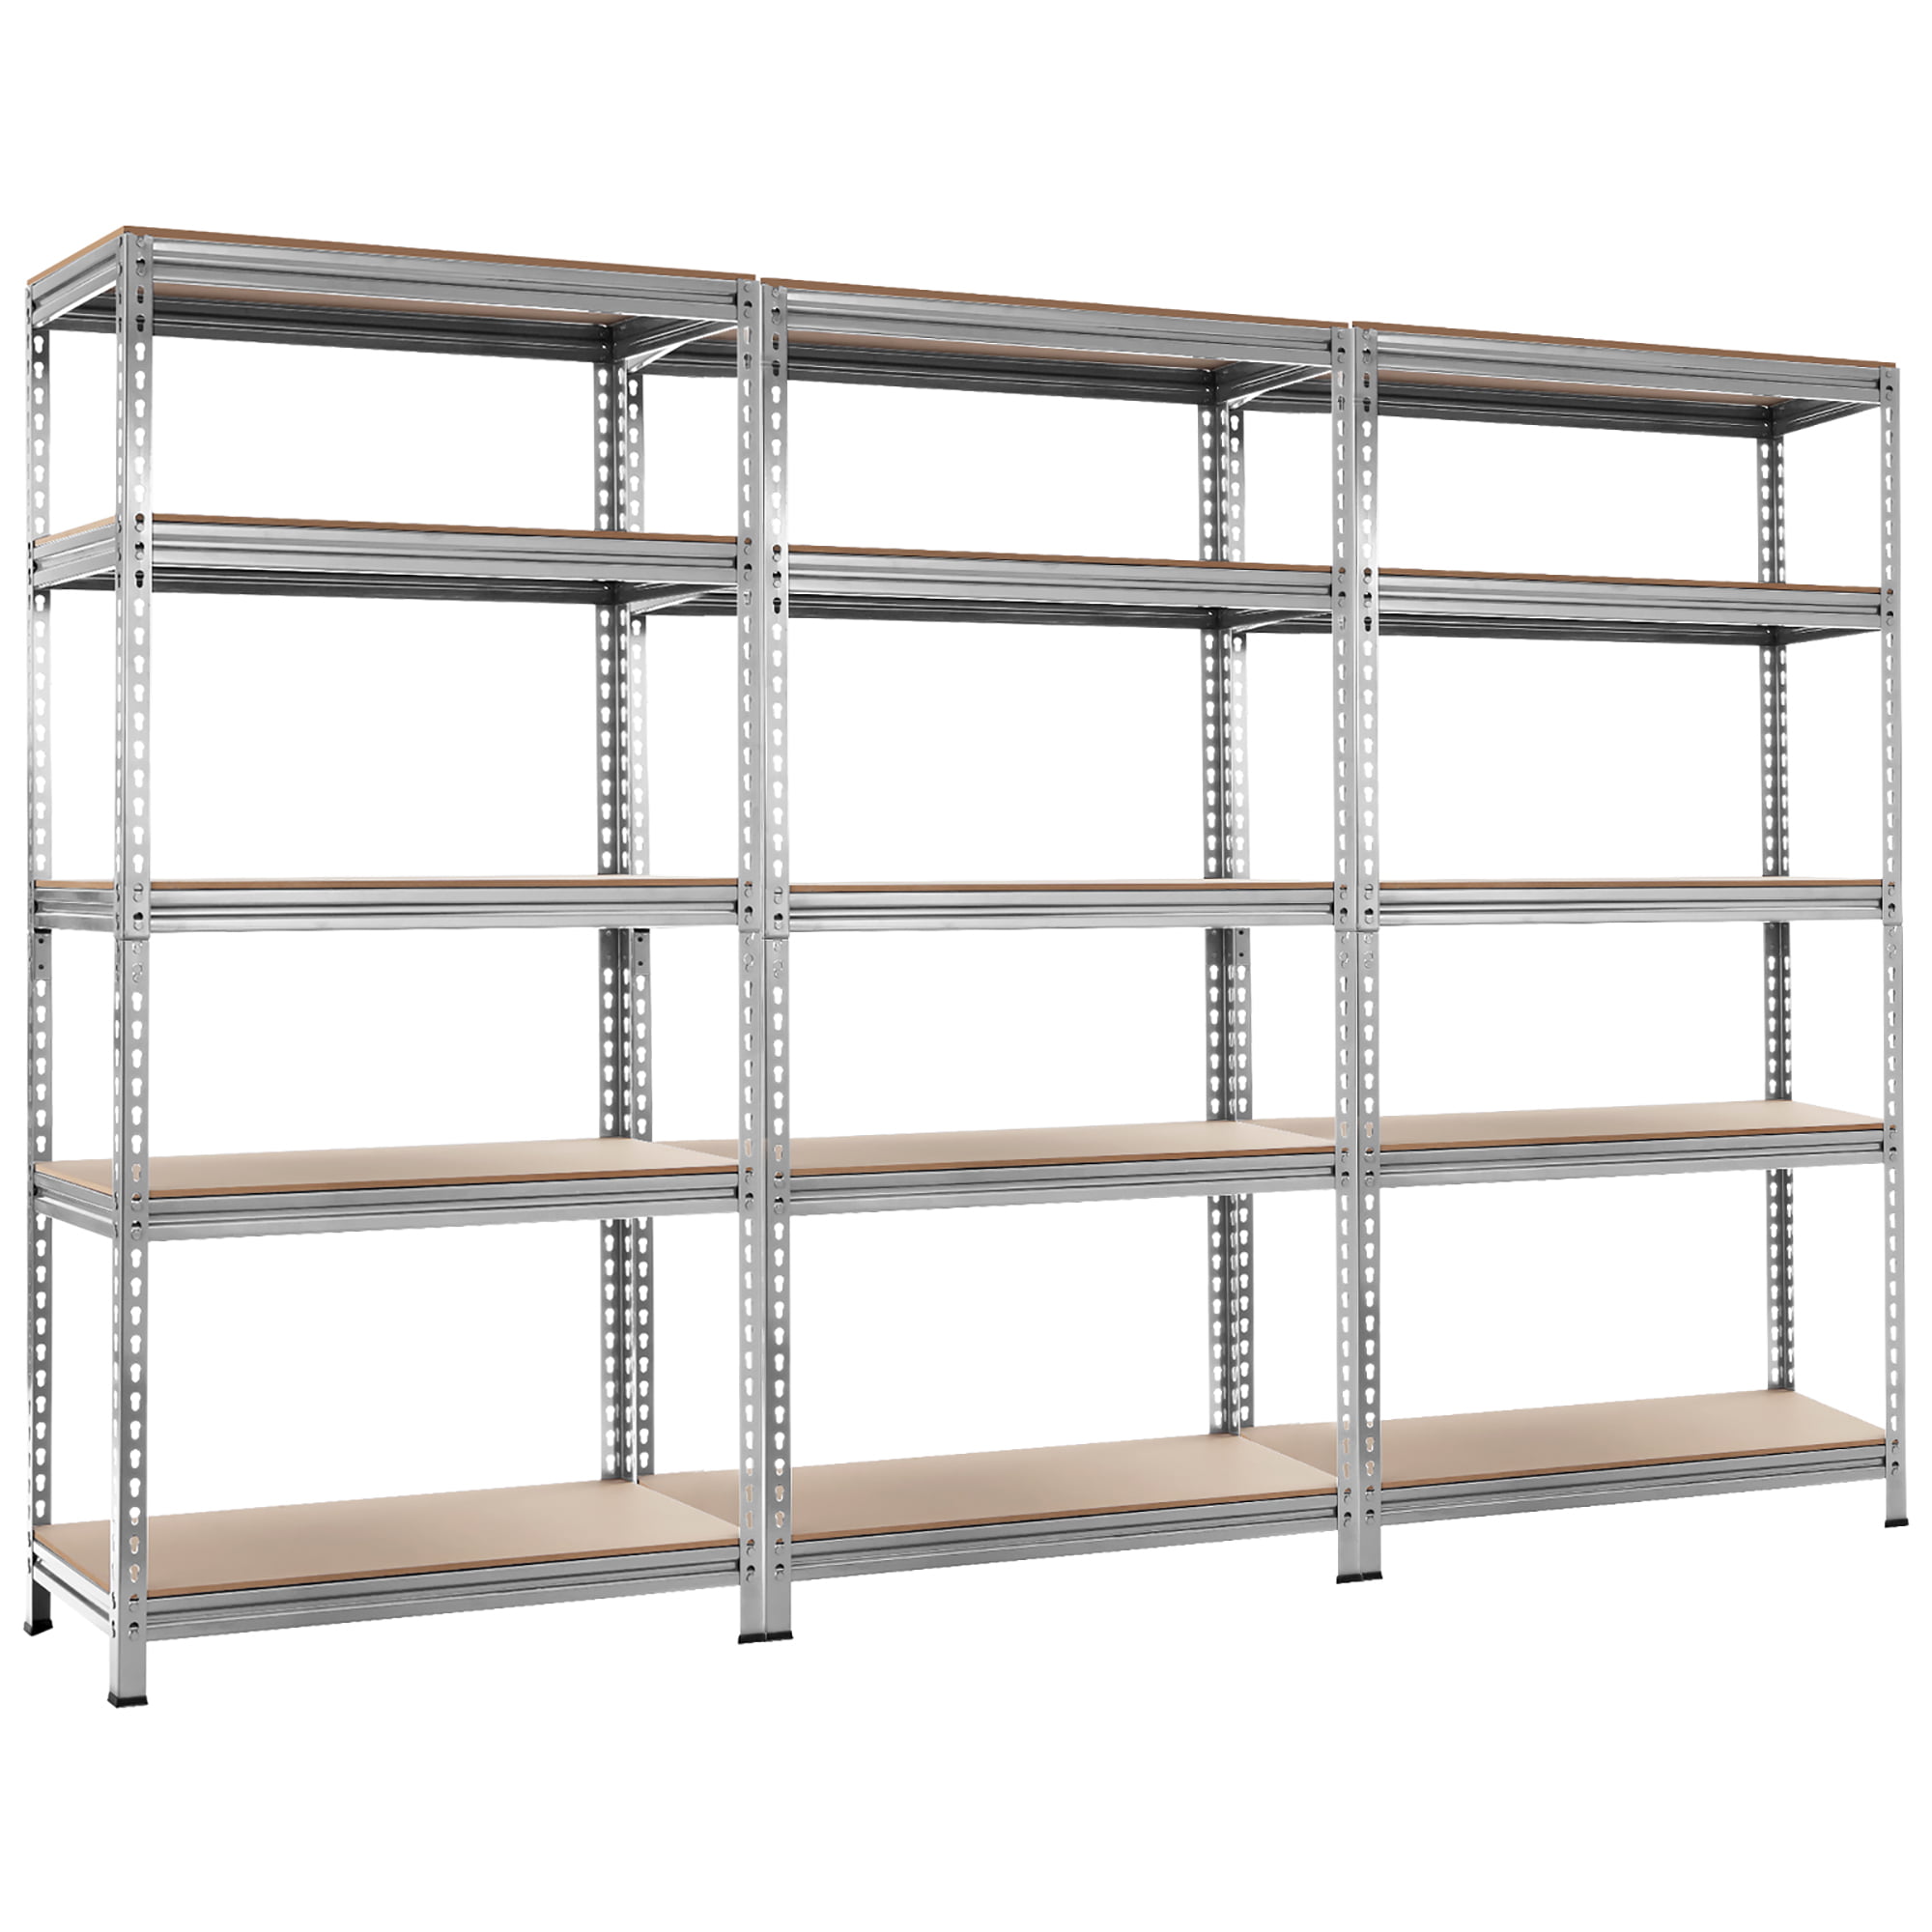 5 Tier Garage Shelving Storage Kit 1 x Without Bolts Angle 